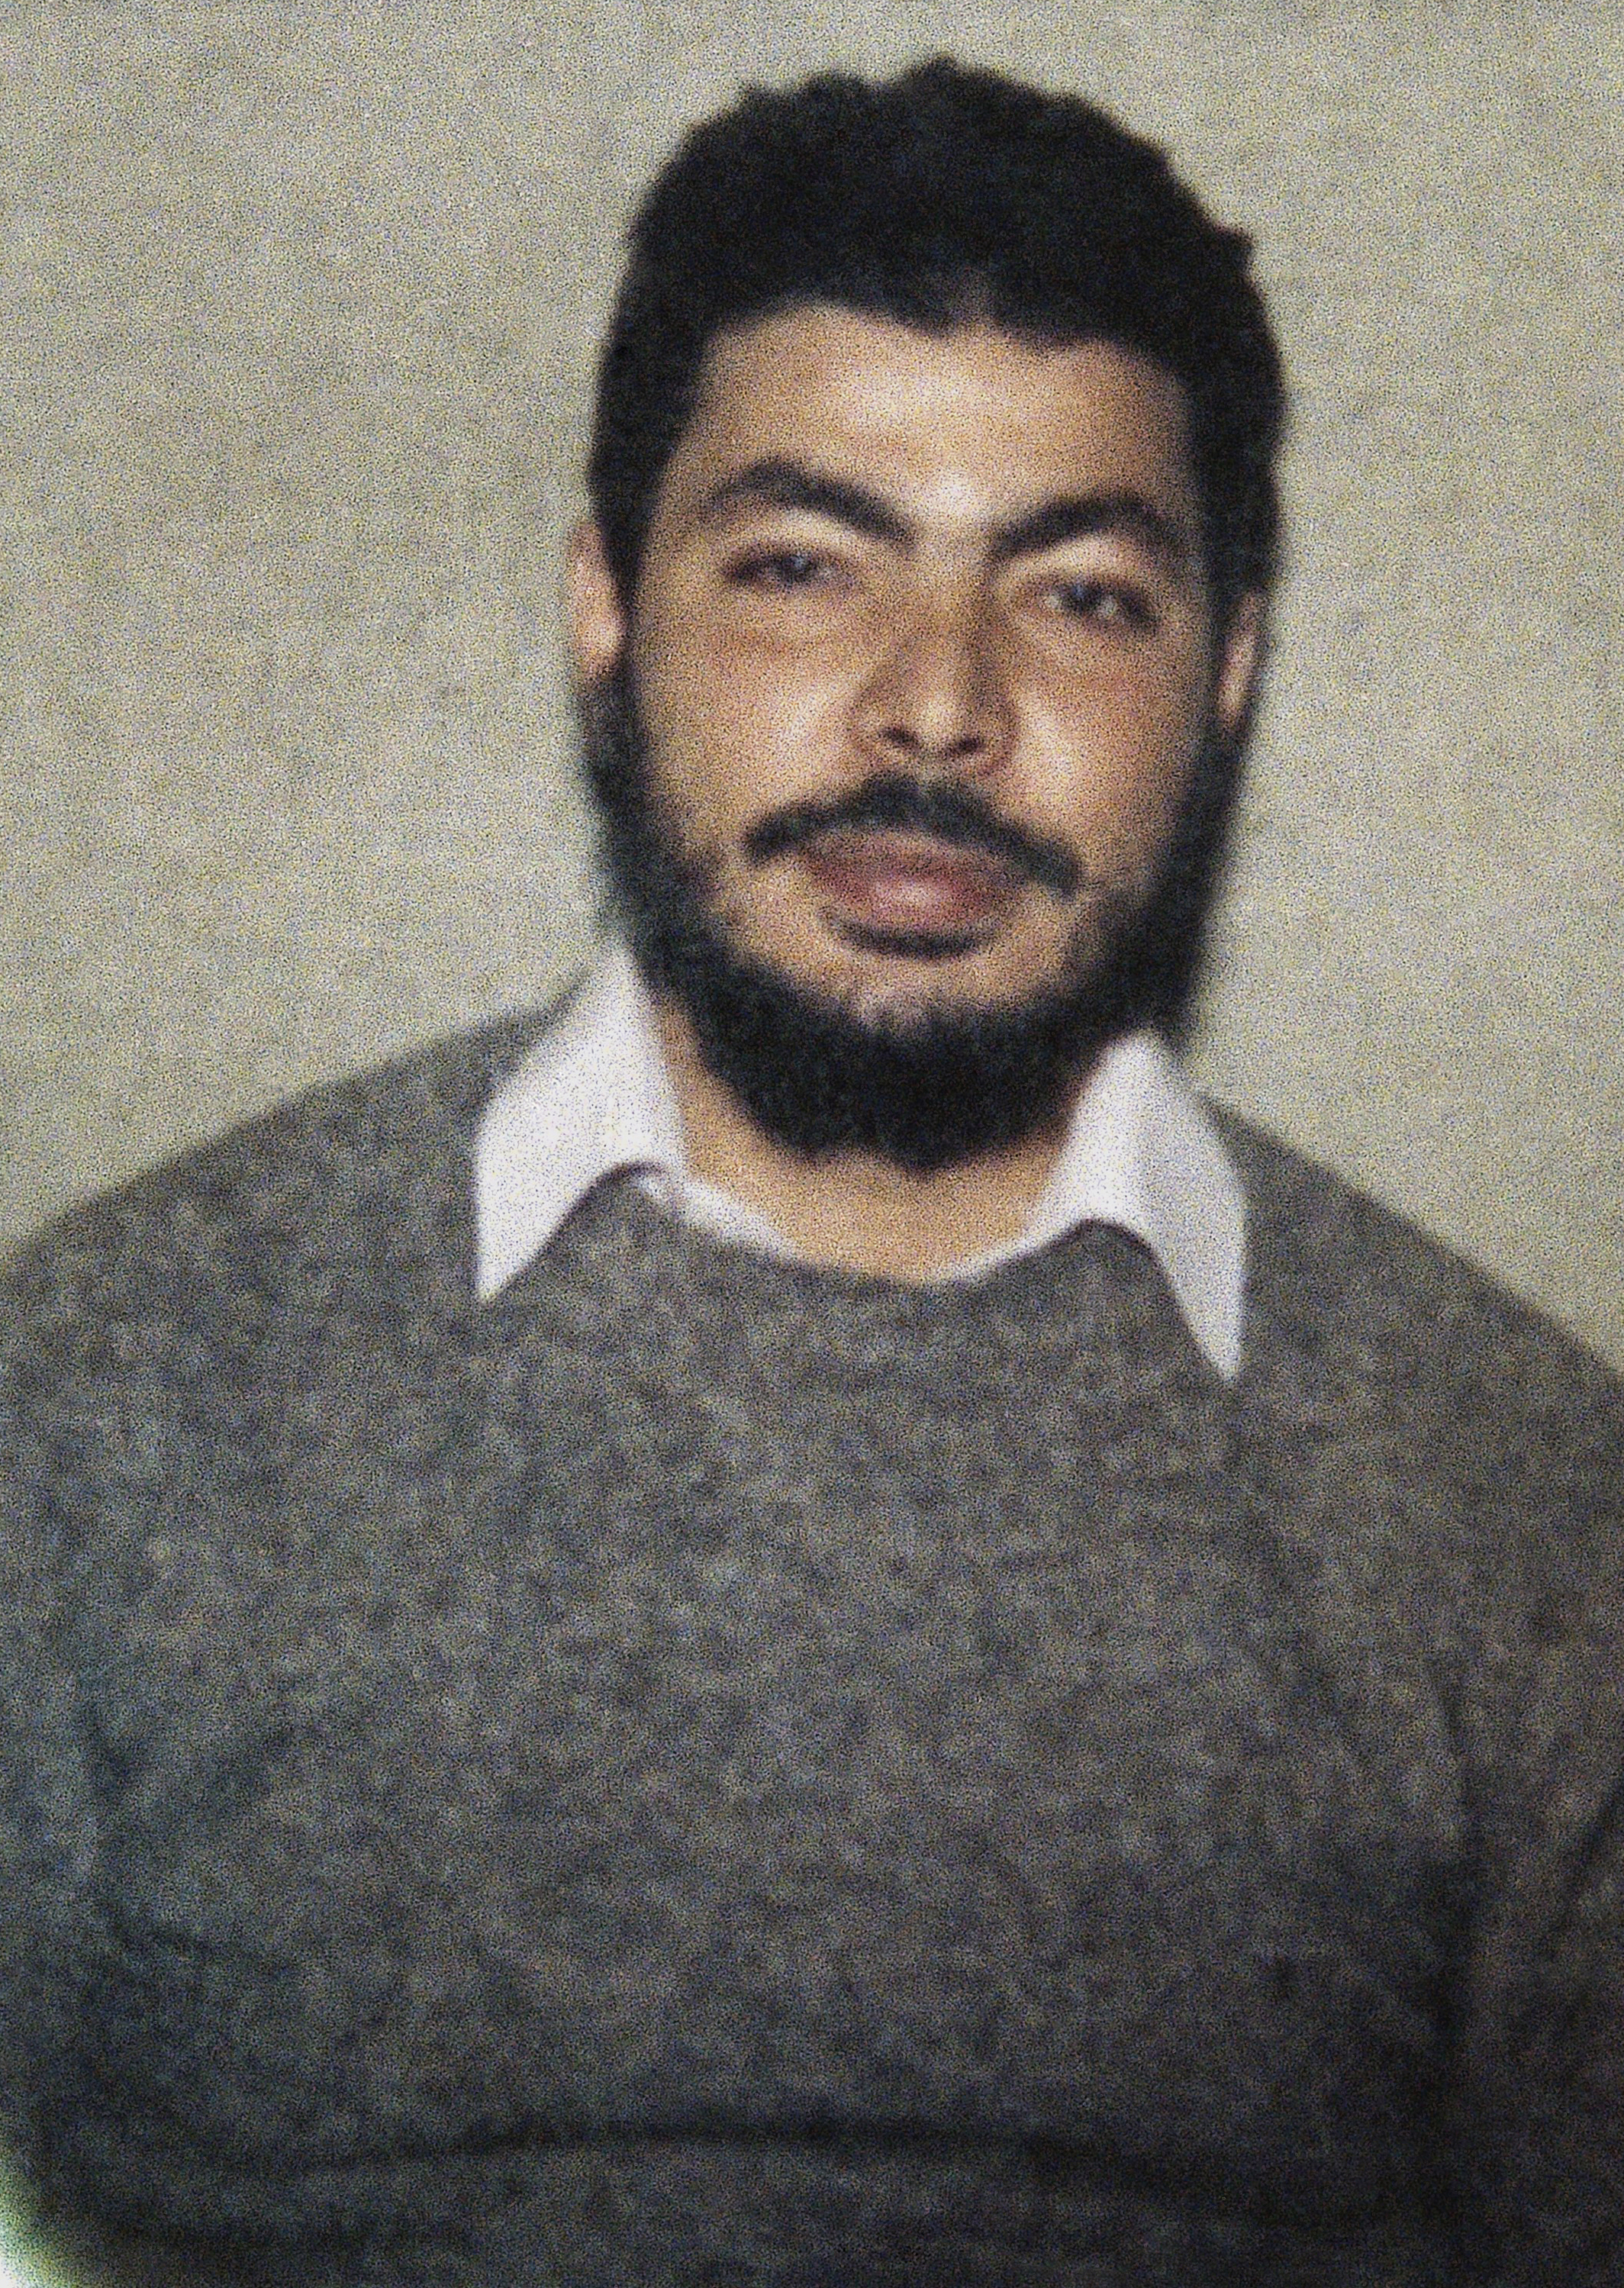 El-Sayyid A. Nosair, alleged assassin of Rabbi Meir Kahane. Nosair was charged with murder.